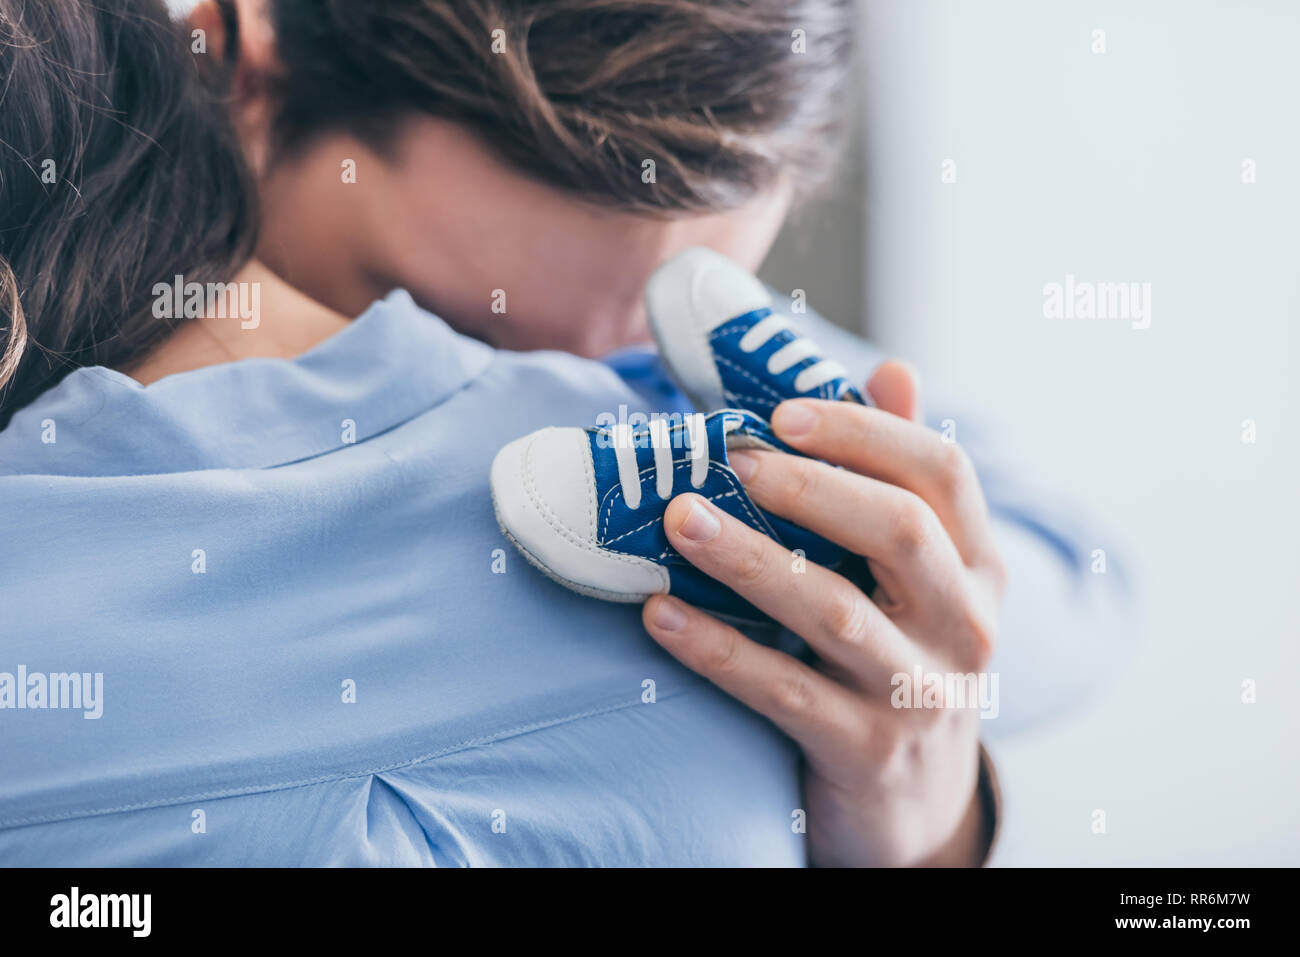 cropped view of man hugging woman and holding blue baby shoes in room, grieving disorder concept Stock Photo